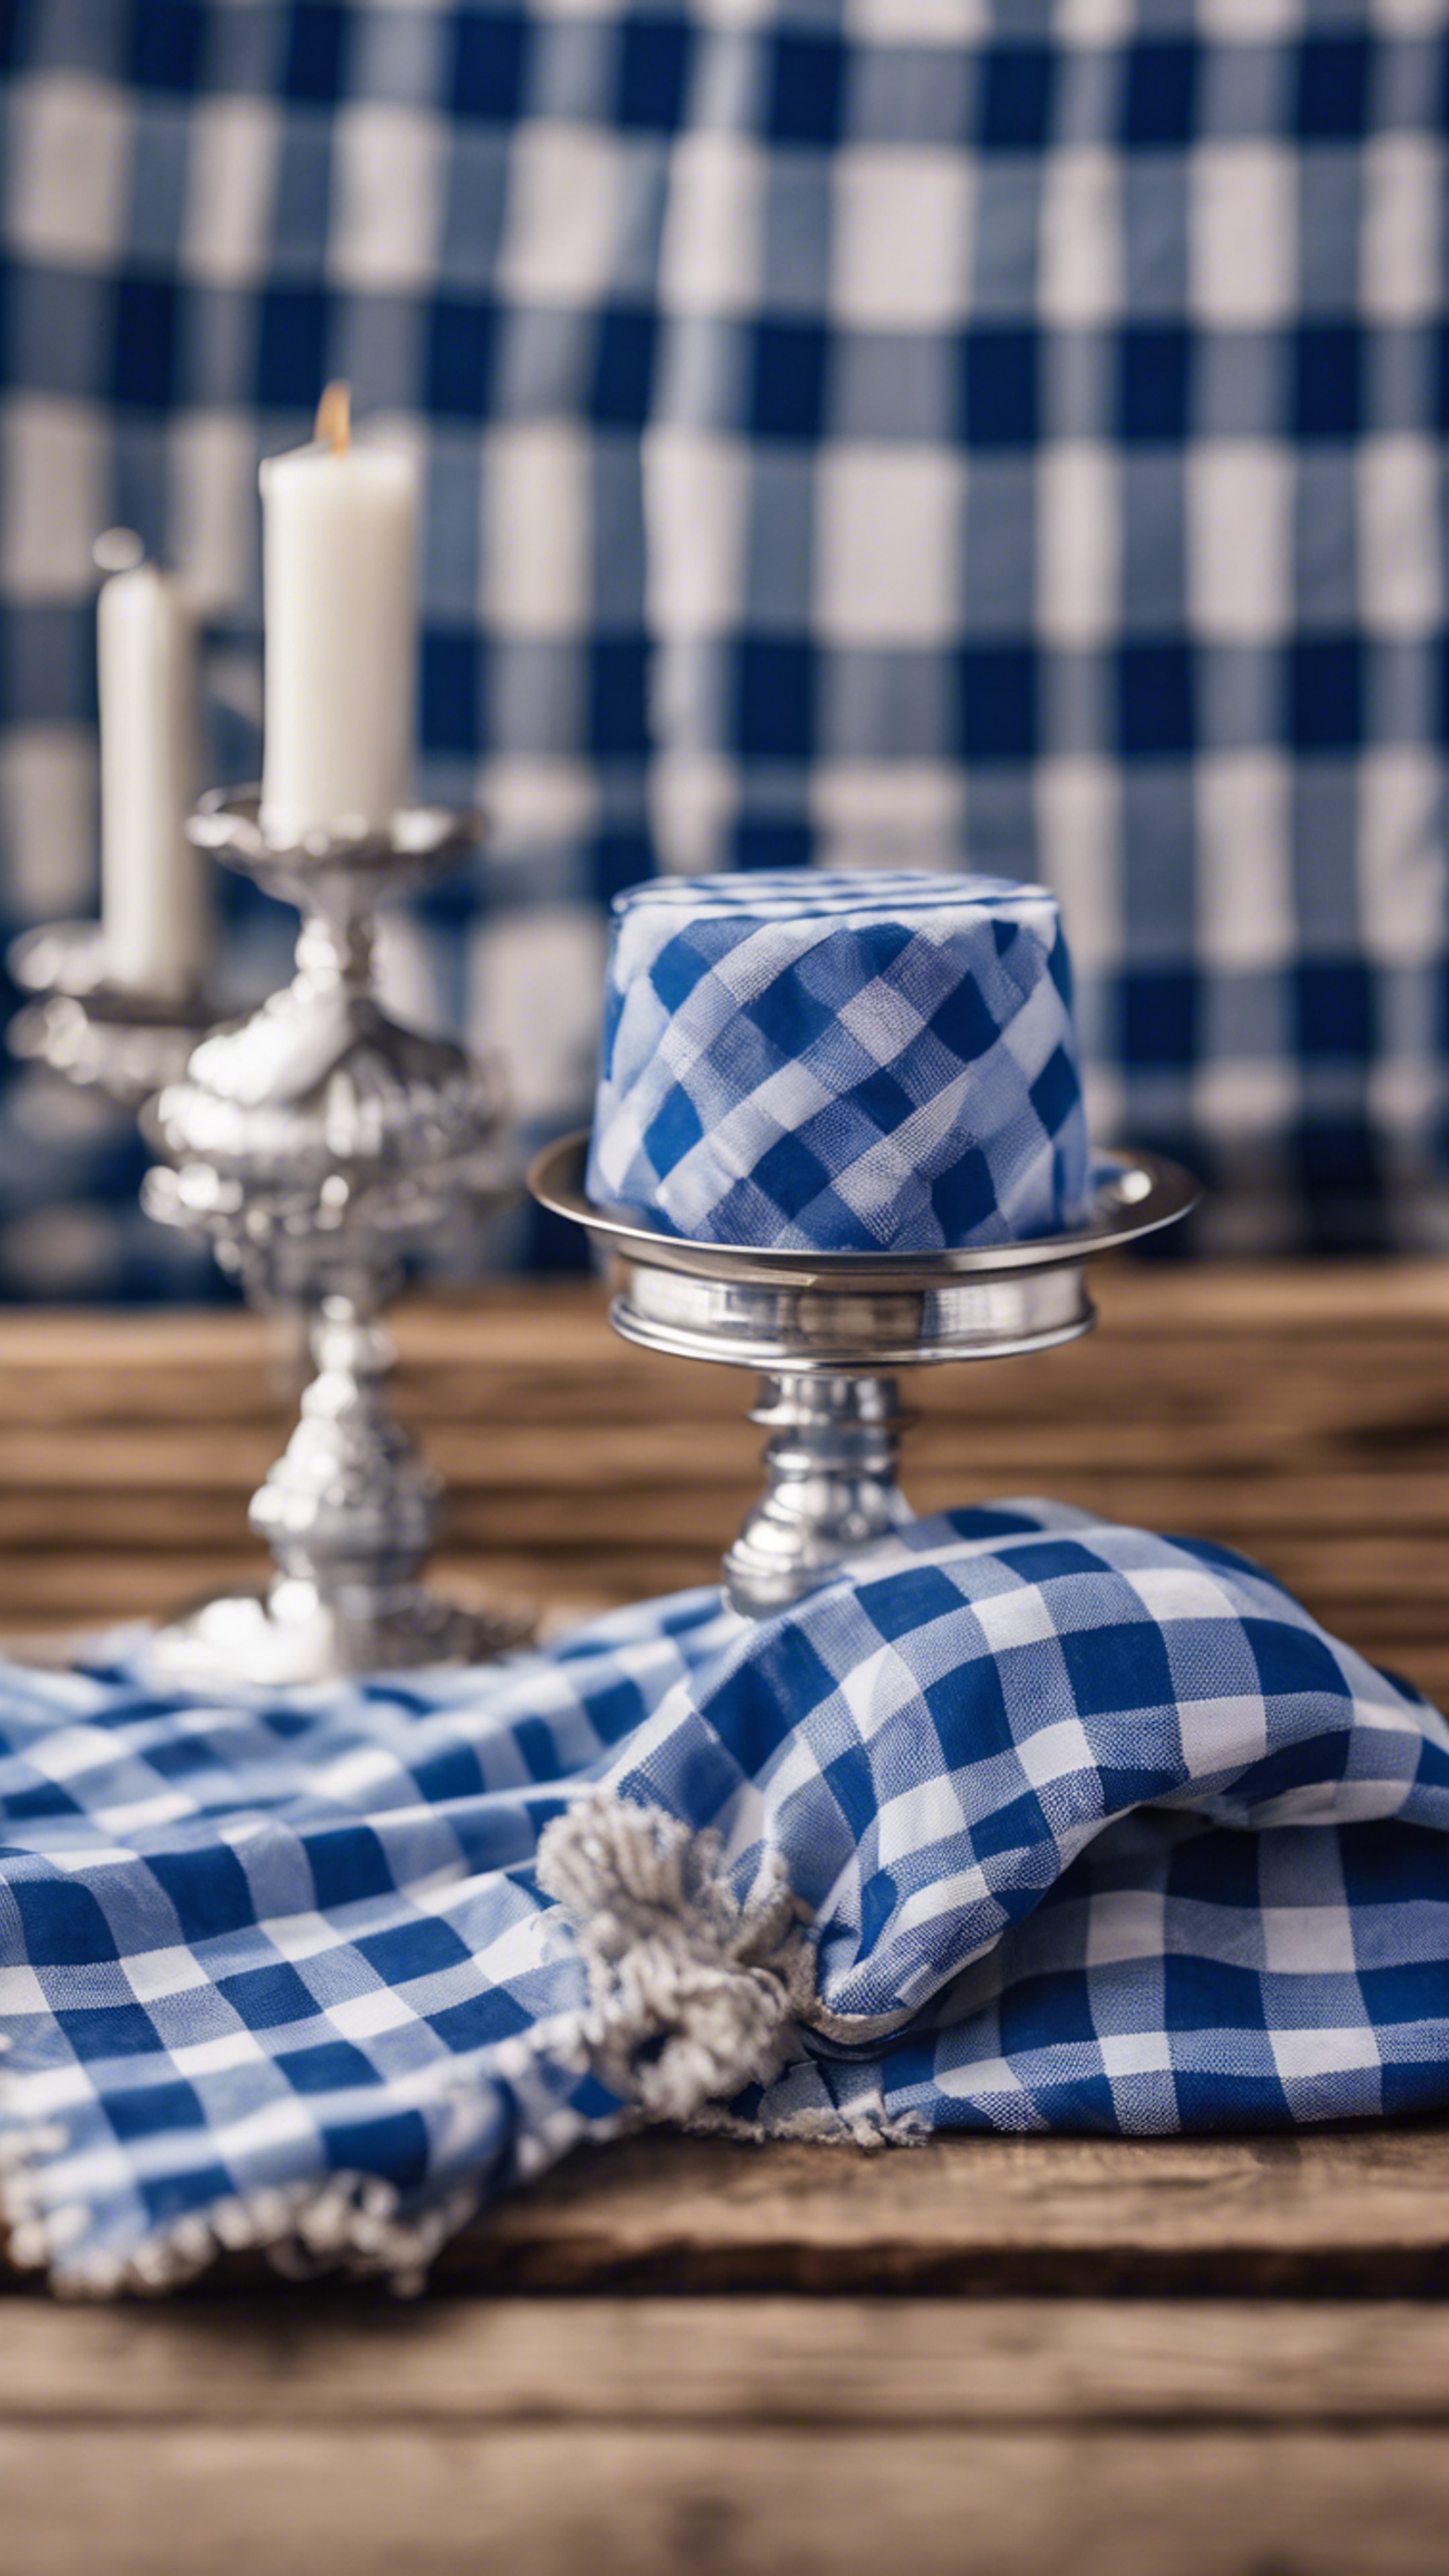 Classic blue checkered gingham fabric draped over a wooden table with a silver candelabra, evoking a preppy picnic scene. Tapeta na zeď[5483729deeeb4e2a9f91]